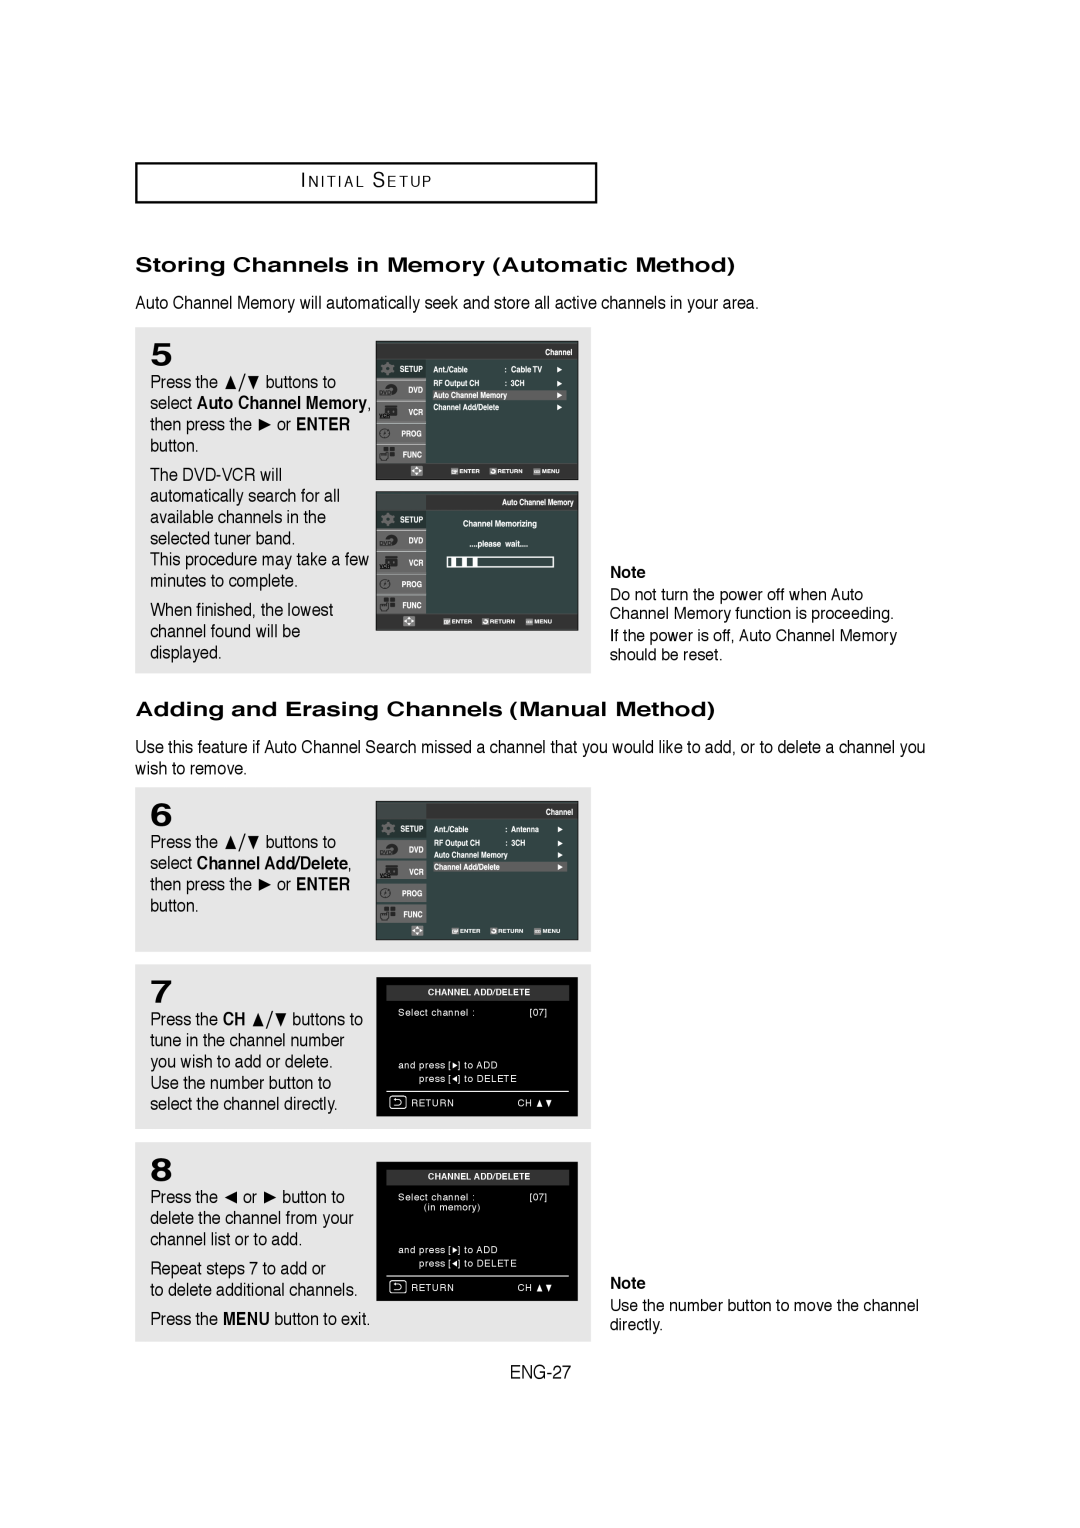 Samsung 20070205090323359 Storing Channels in Memory Automatic Method, Adding and Erasing Channels Manual Method, ENG-27 